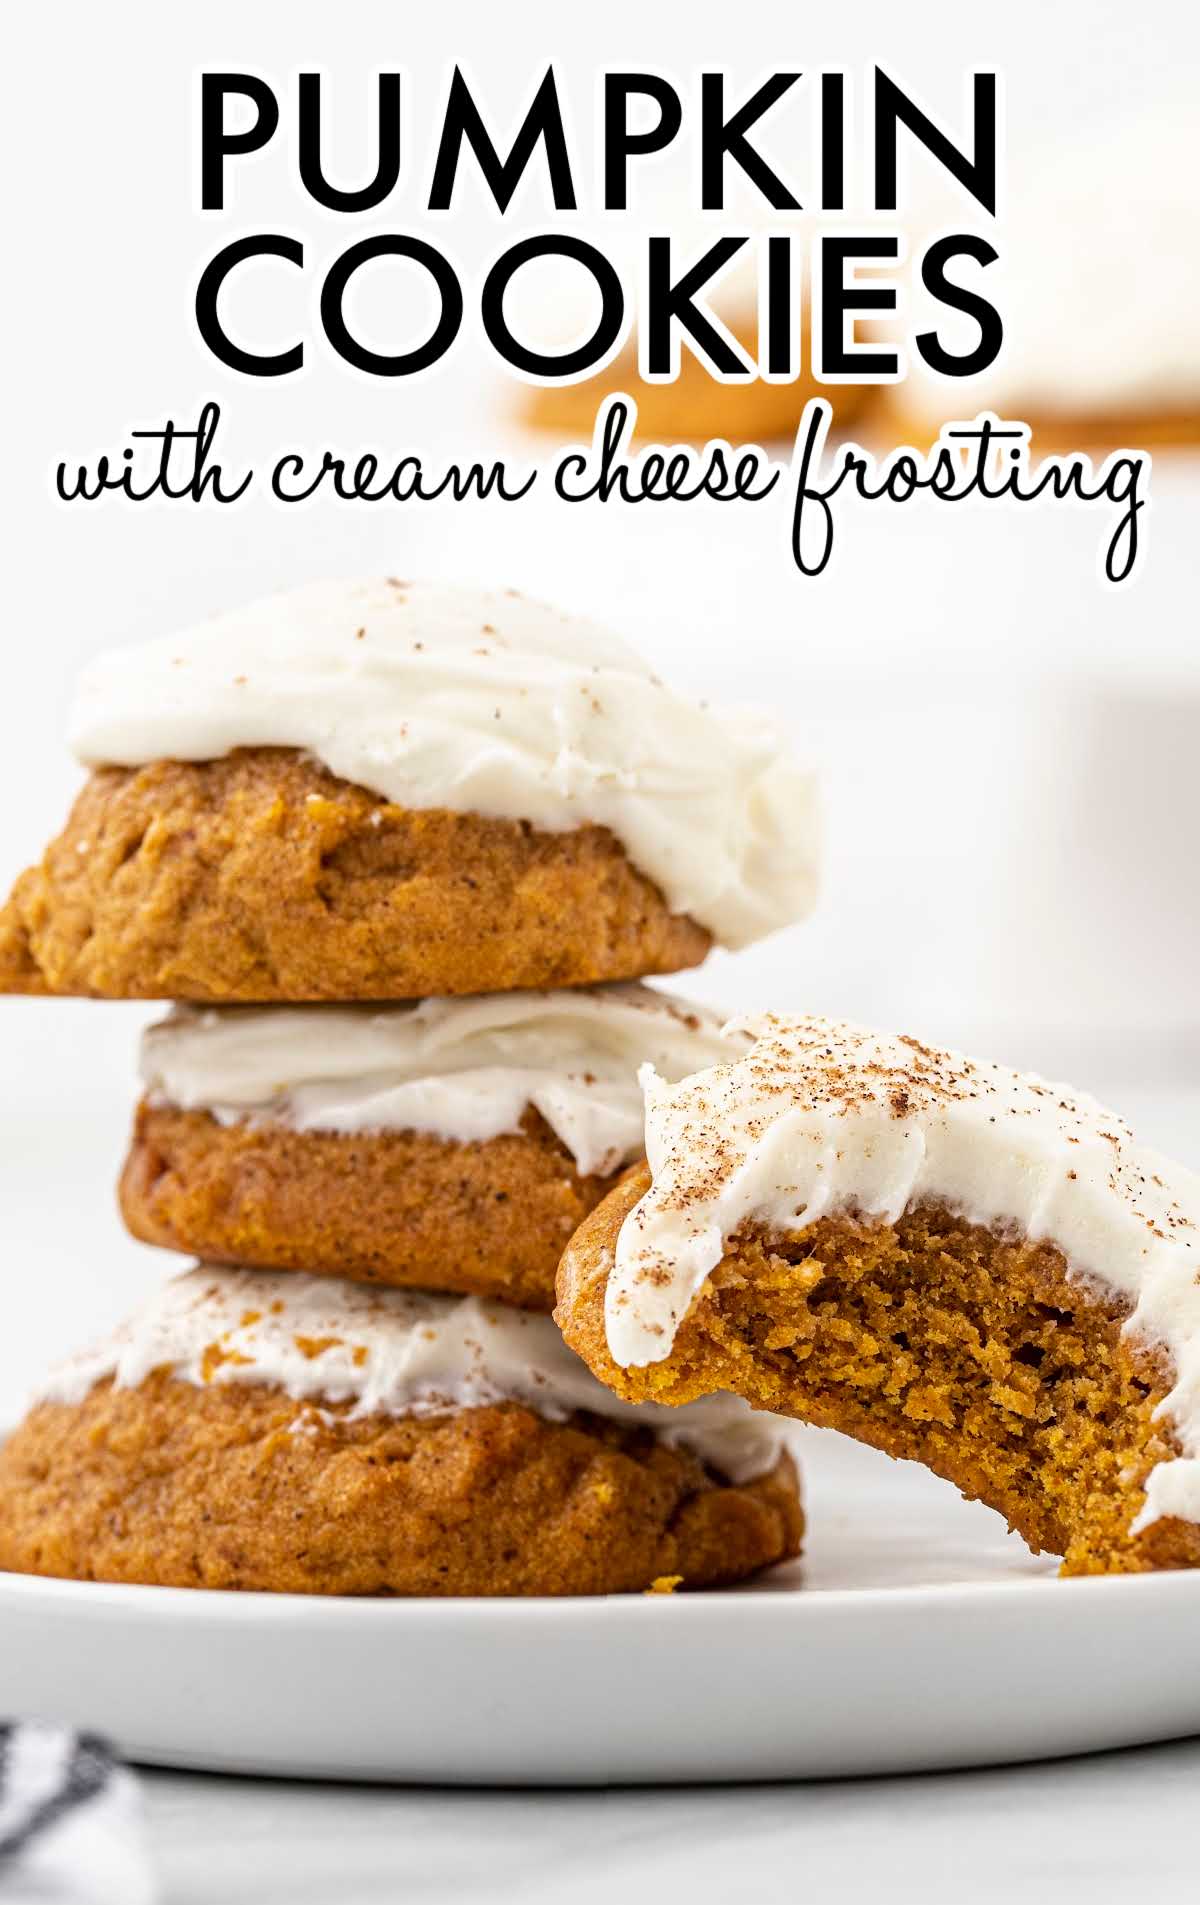 Pumpkin Cookies with Cream Cheese Frosting - Pass the Dessert